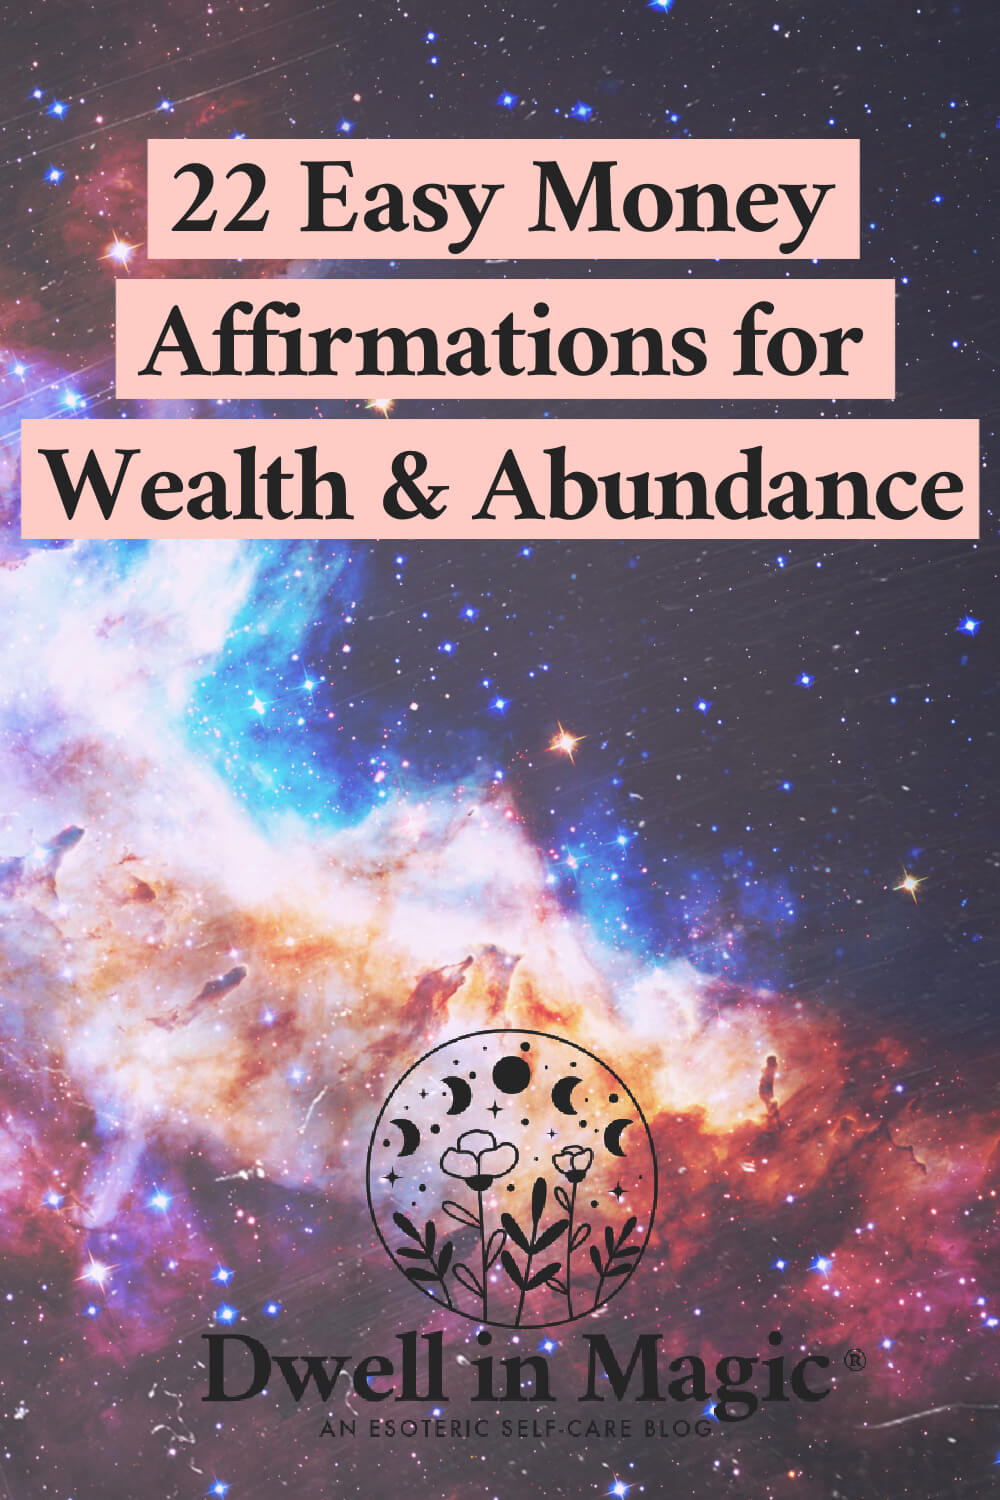 Easy money affirmations for wealth and abundance